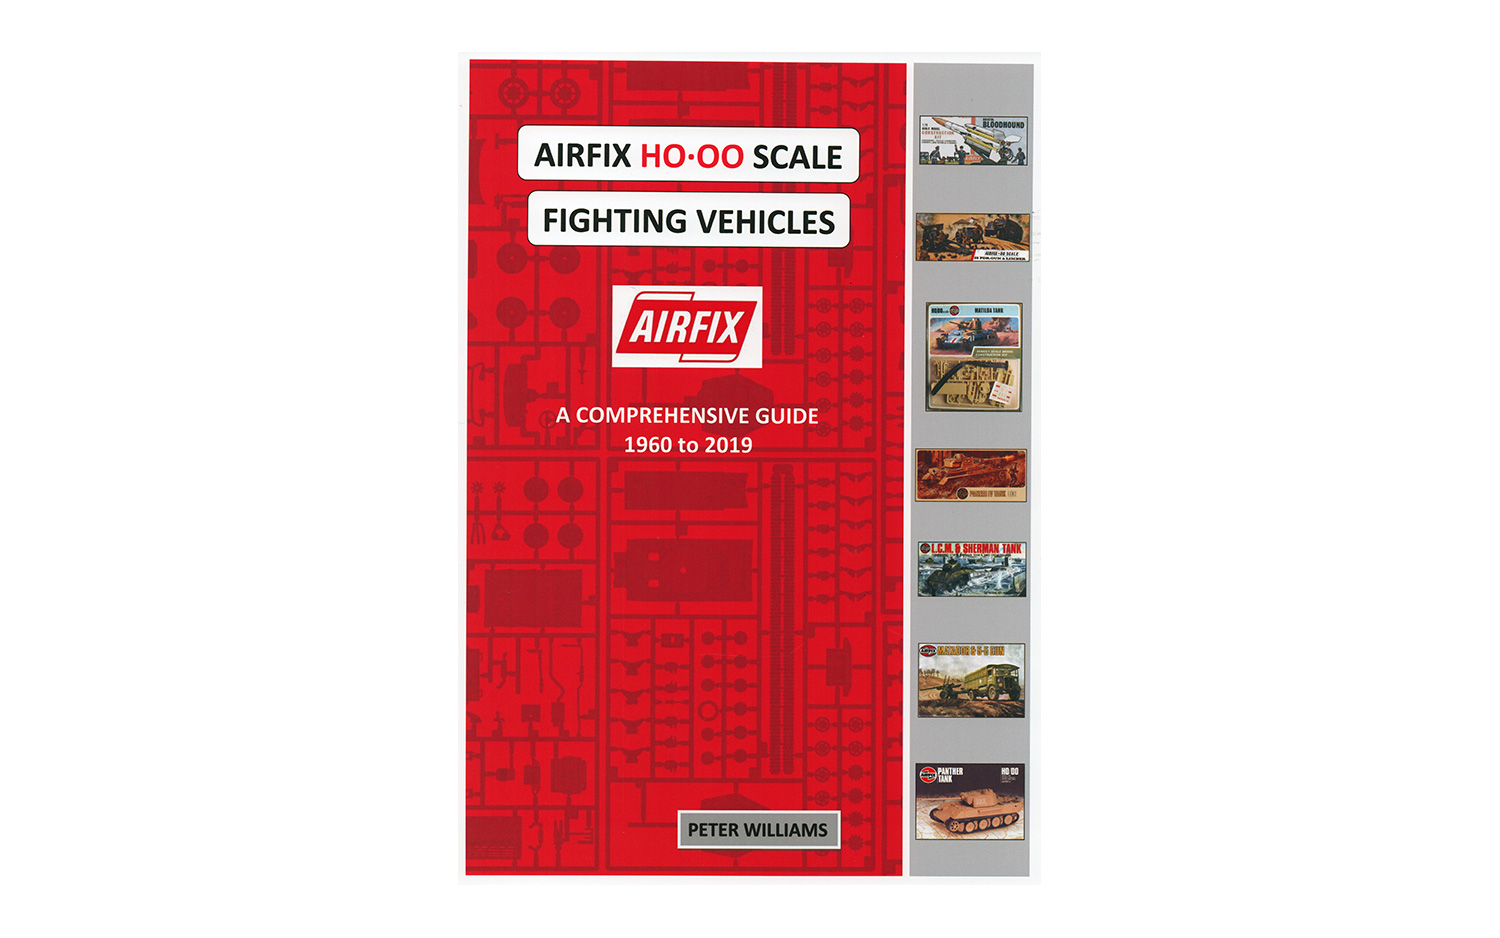 Airfix – HO OO Scale Fighting Vehicles - A Comprehensive Guide 1960 to 2019